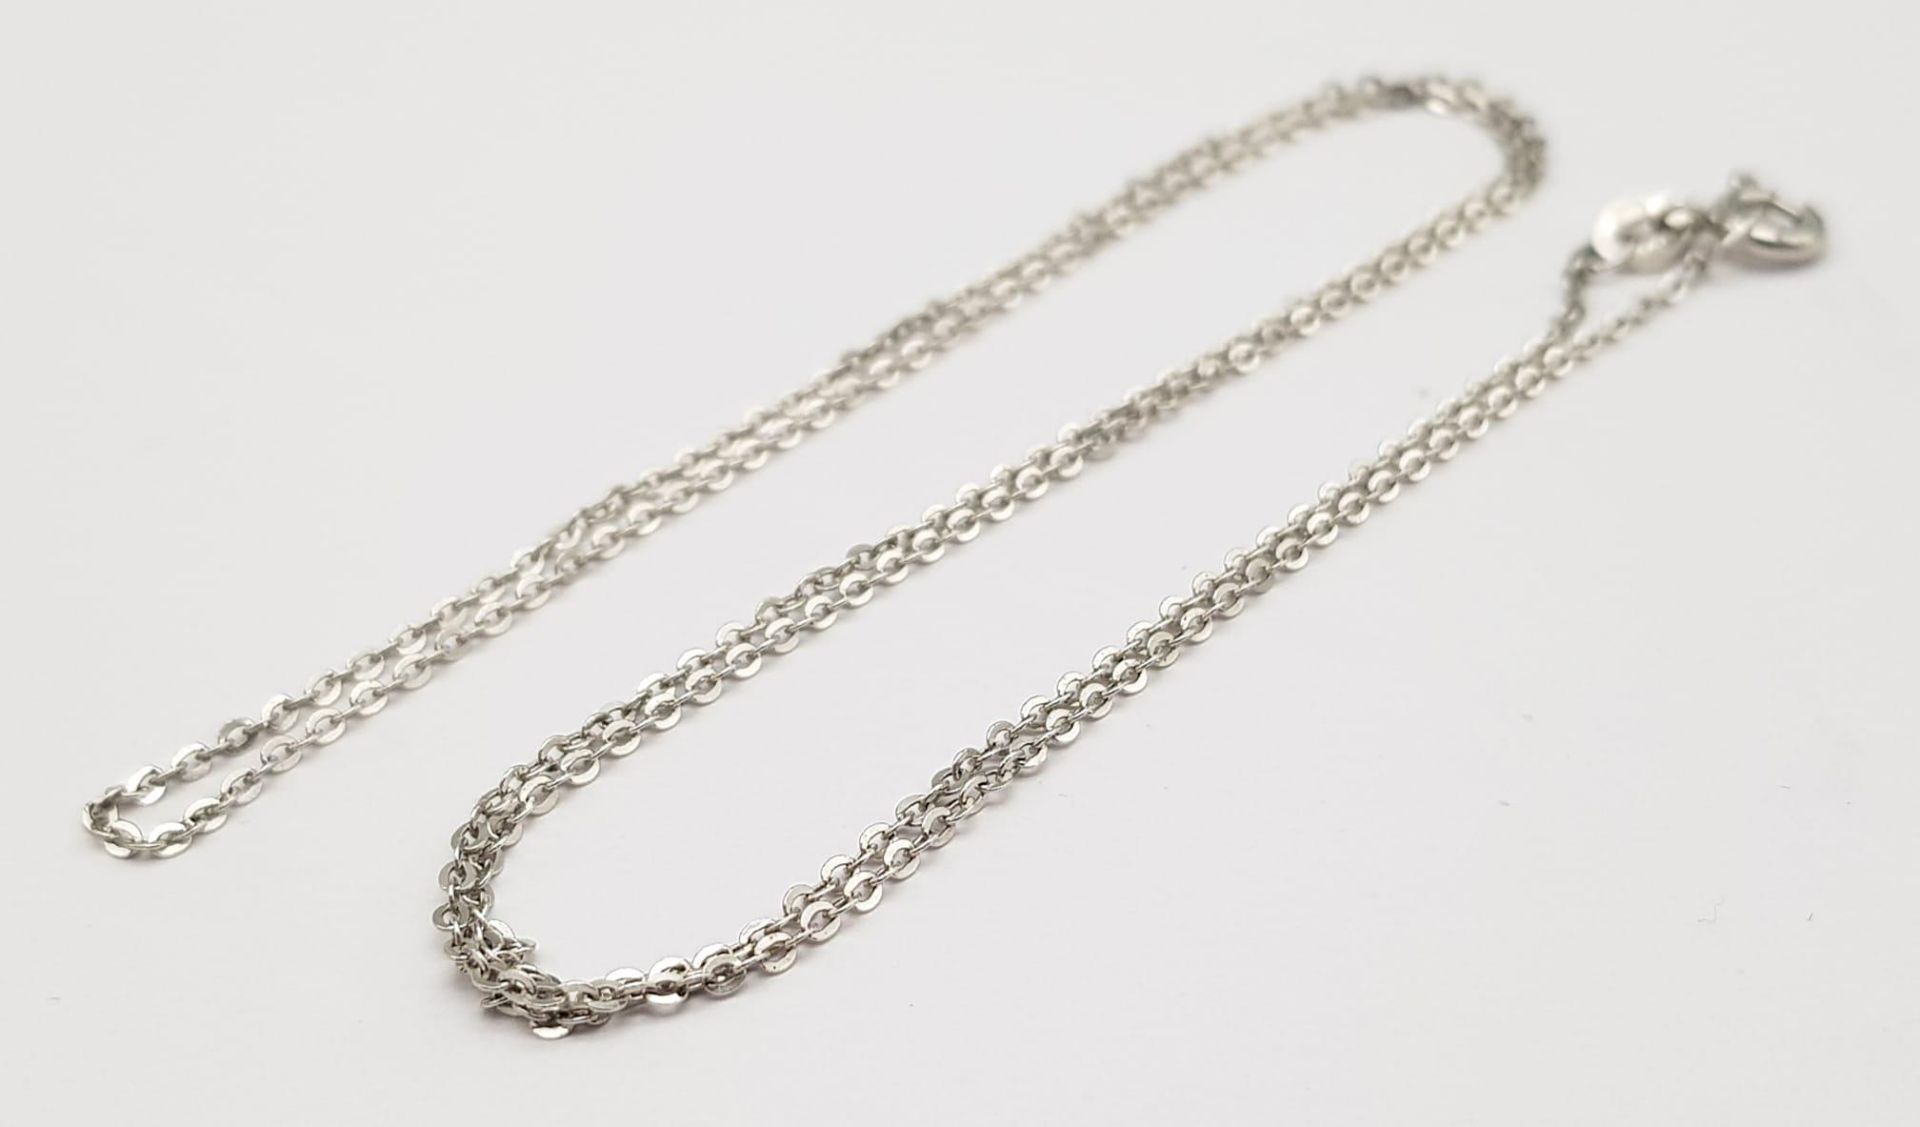 A DELICATE 18K WHITE GOLD TRACE LINK CHAIN, APPROX 20" LONG AND WEIGHT 2G